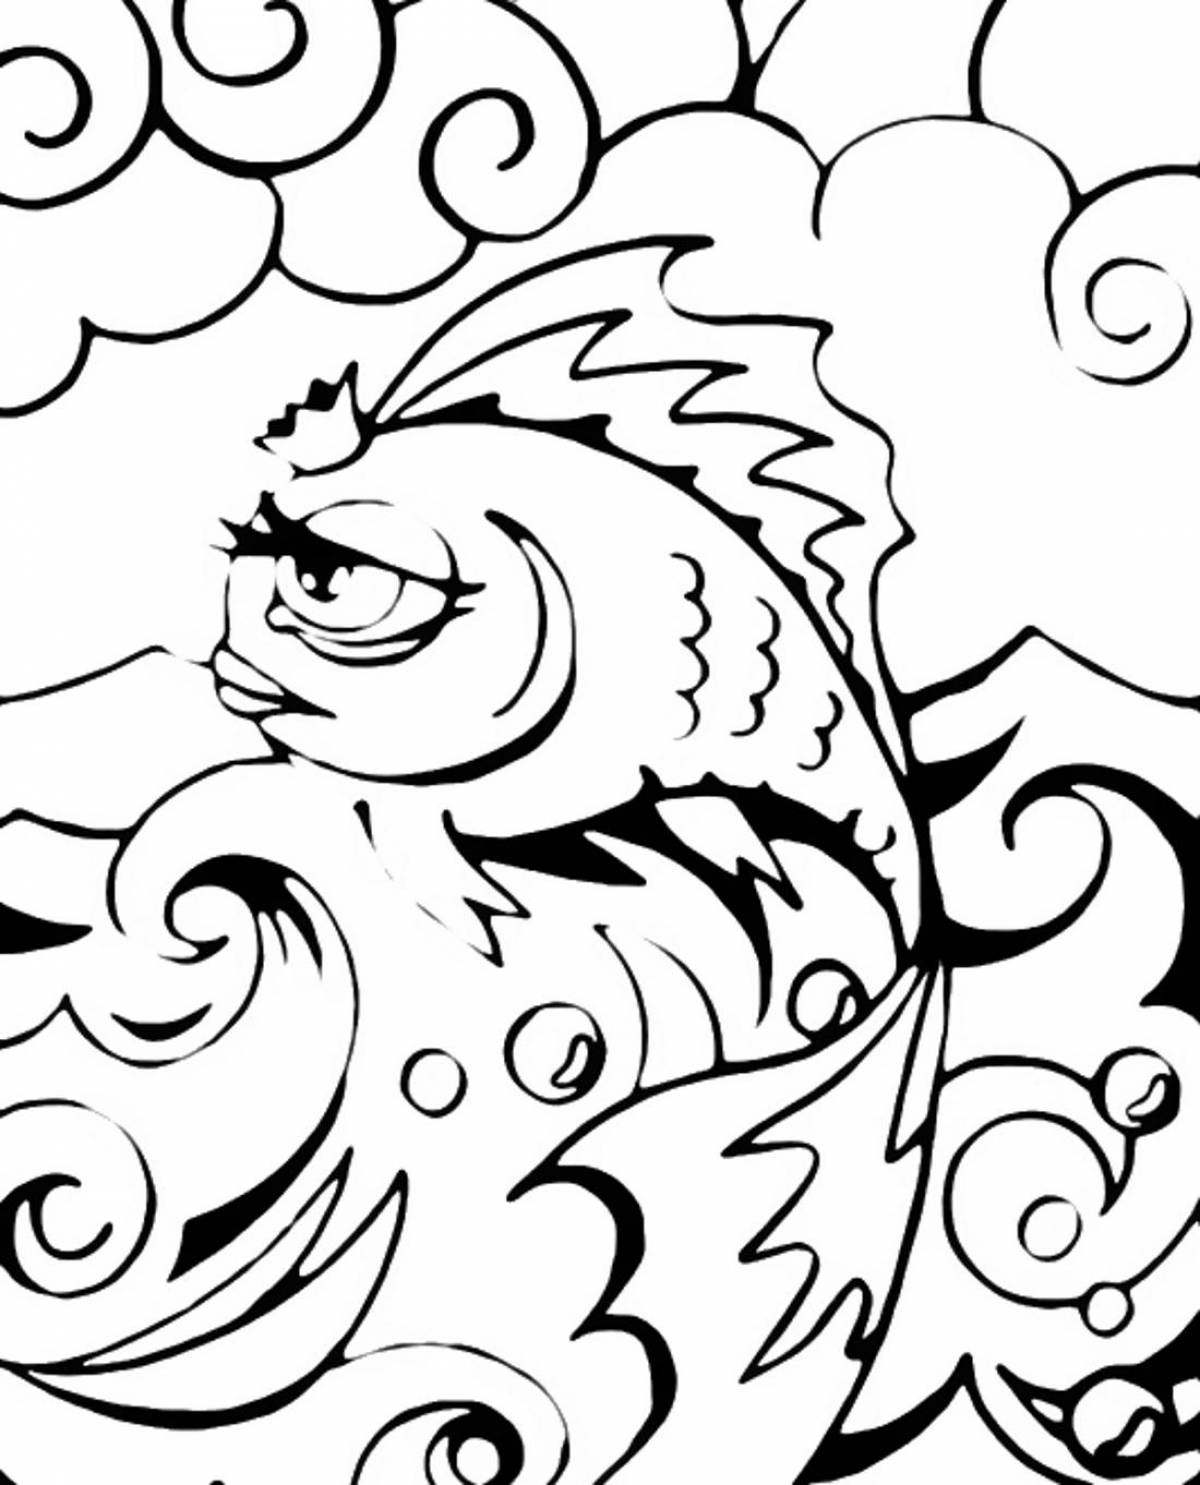 Colorful coloring page of Pushkin's fairy tale